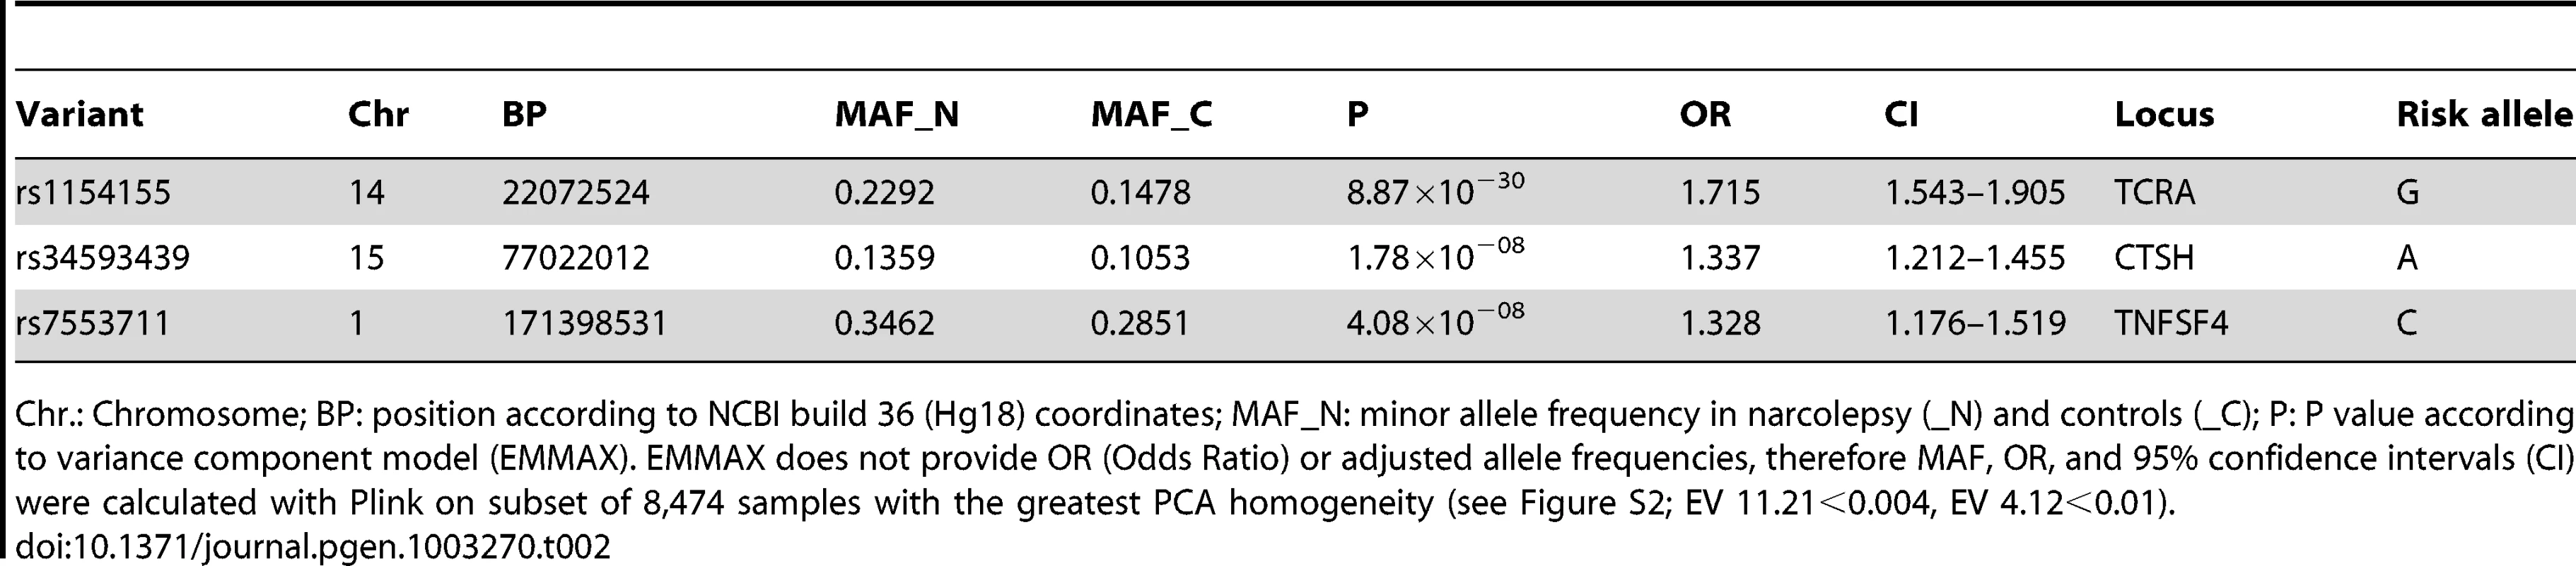 Non-HLA narcolepsy risk variant loci reaching genome-wide significance.